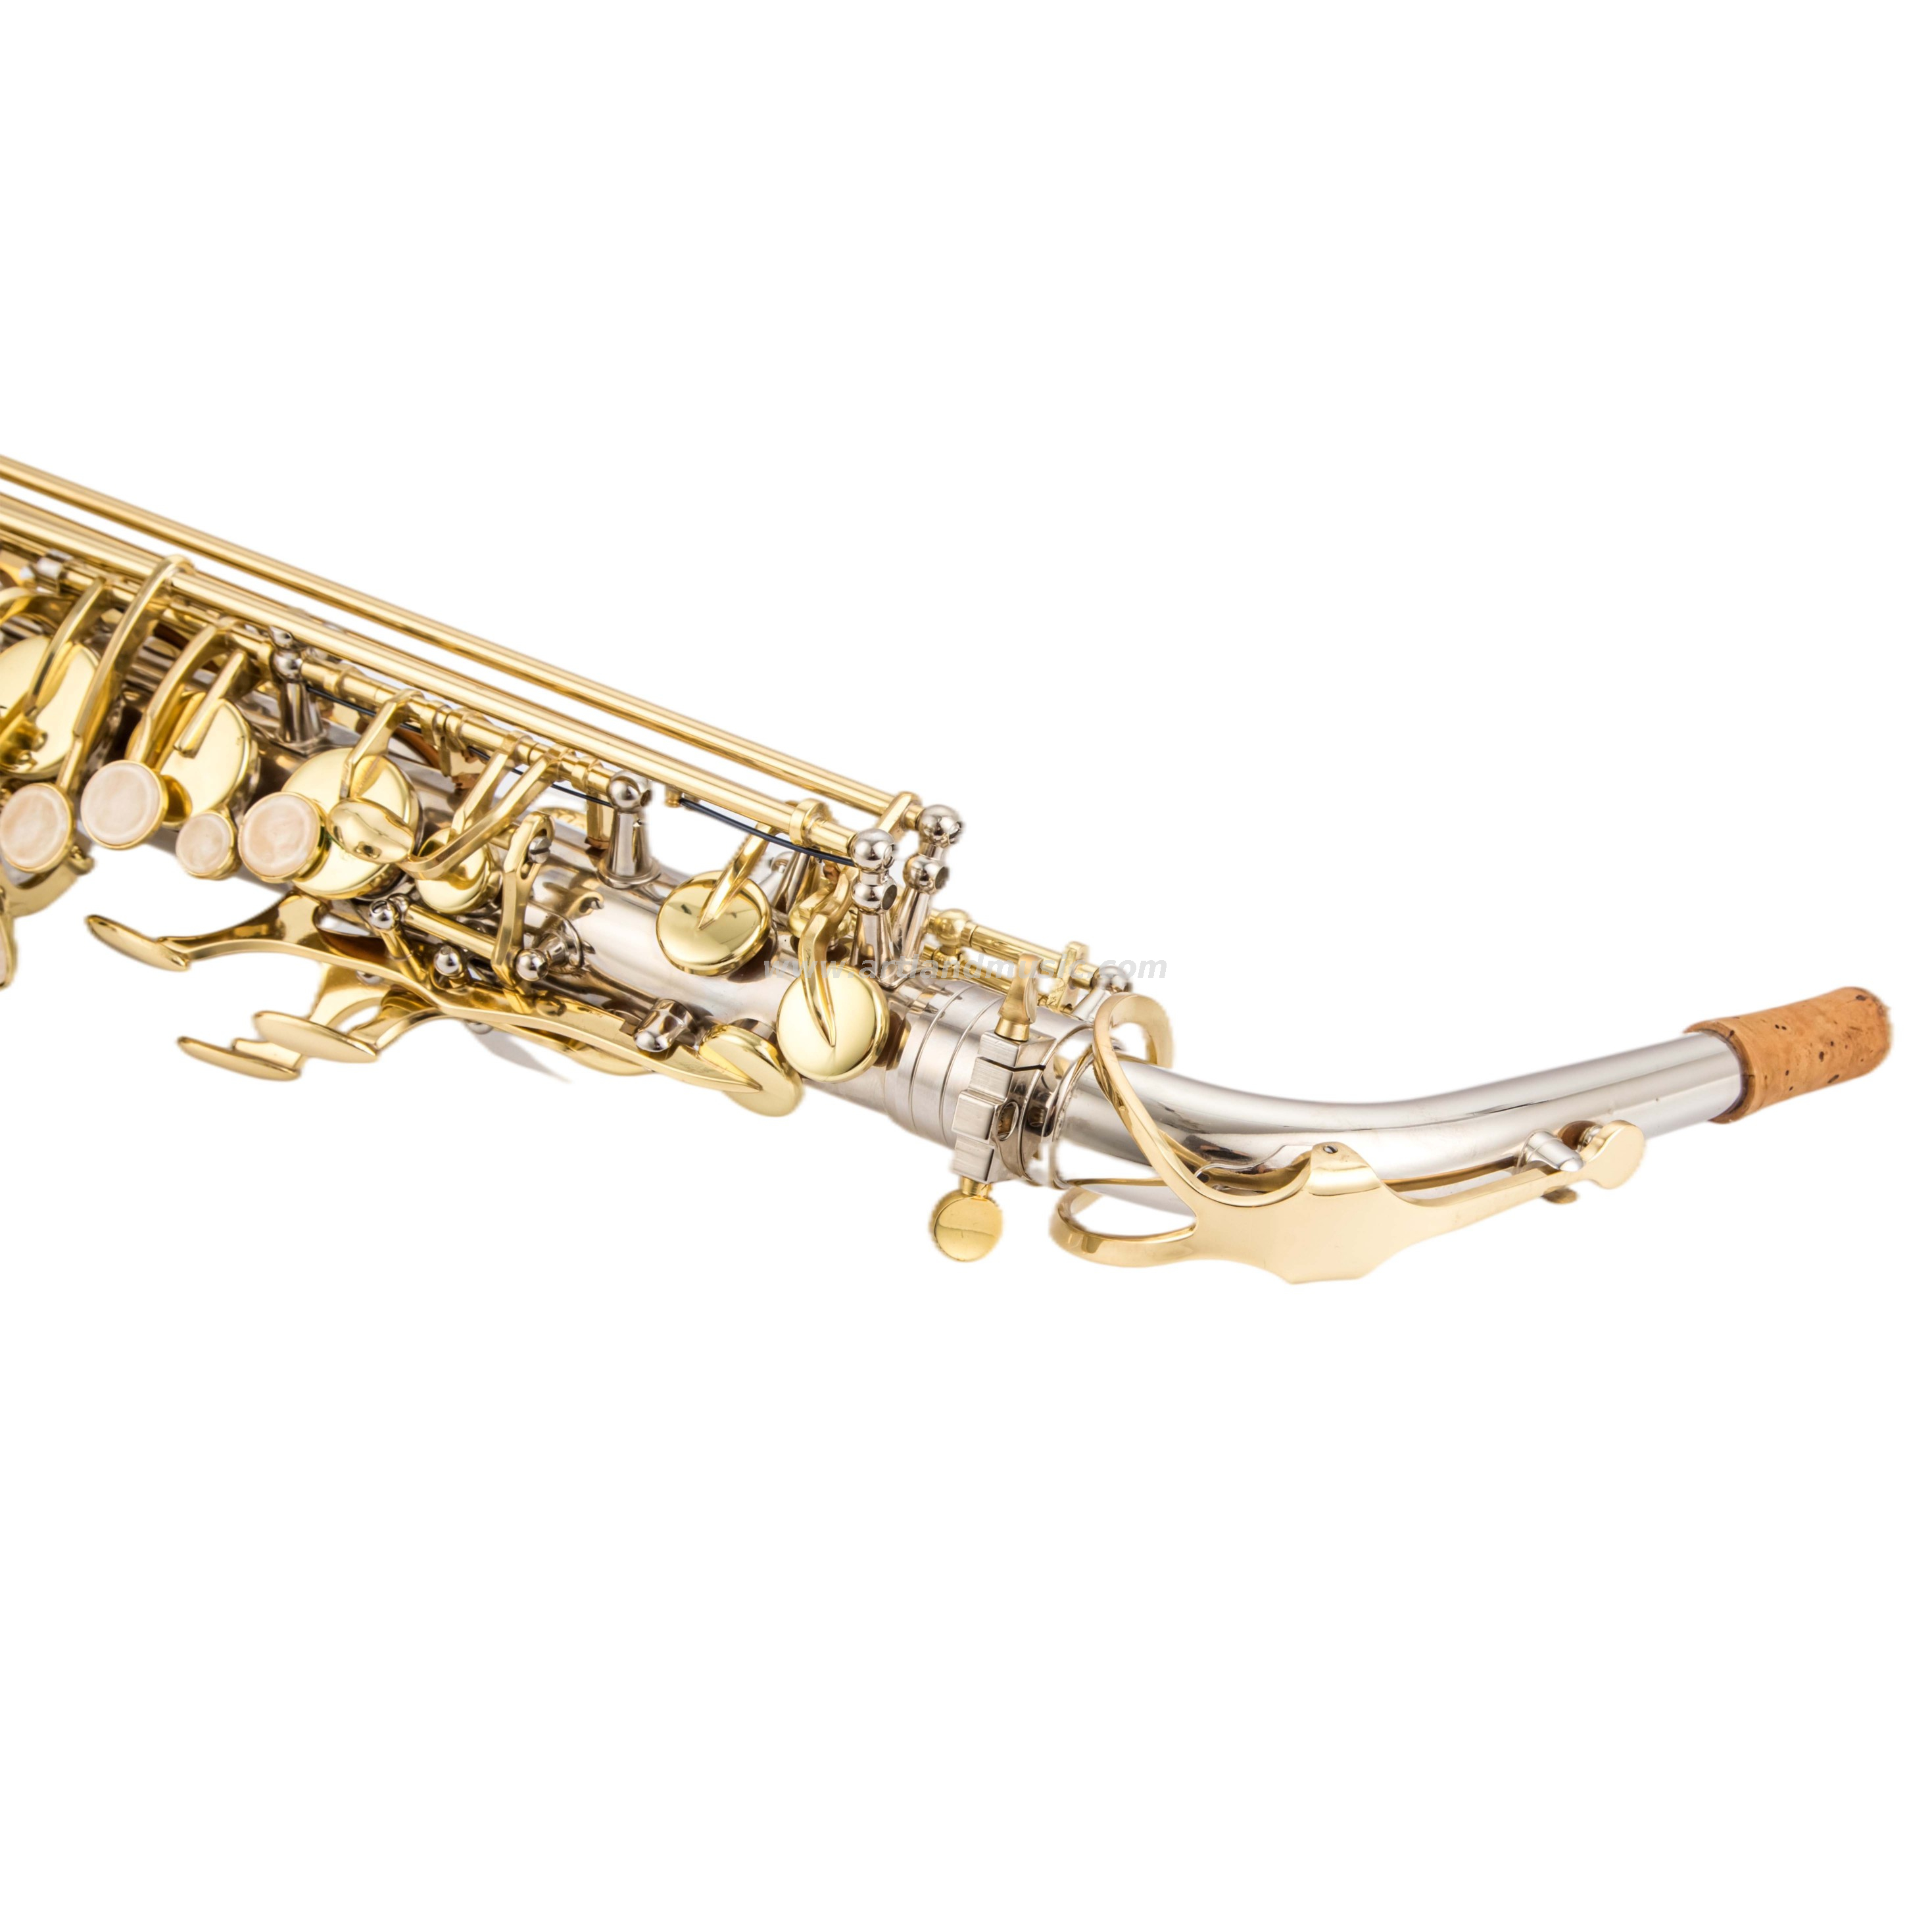 Nickel Finished Alto Saxophone With Gold Key( AAS5505NL)